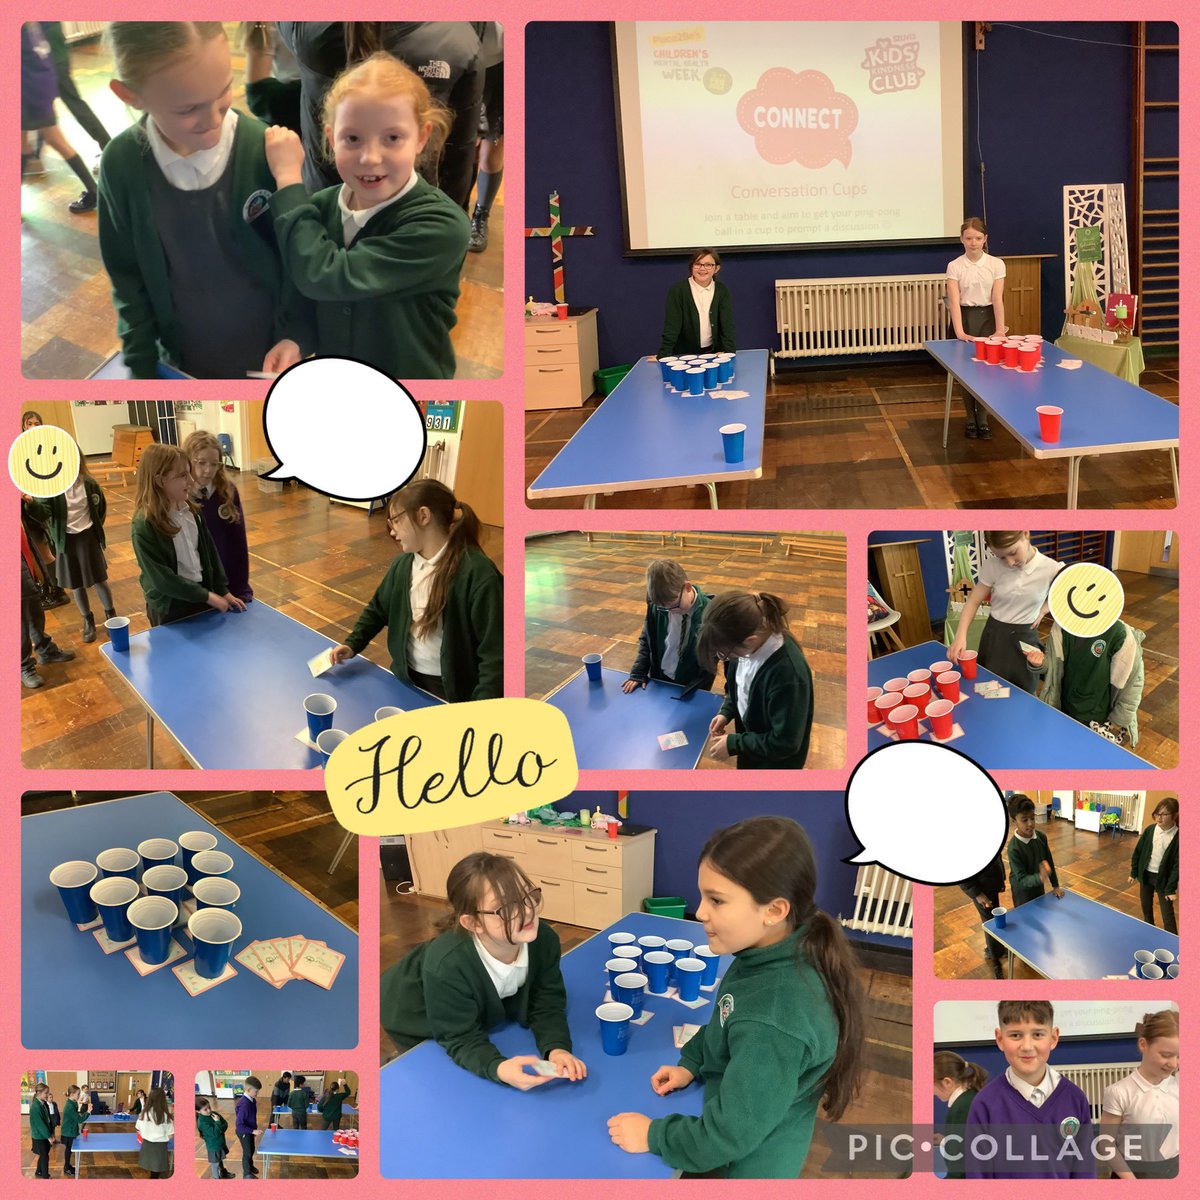 Well today’s #ChildrensMentalHealthWeek activity was a hit! Thank you to our Kindness Club volunteers for helping children ‘connect’ with their friends this lunch time using a game including our @myHappymind_ conversation cards. @sjsbmh #sjsbsmsc @Place2Be